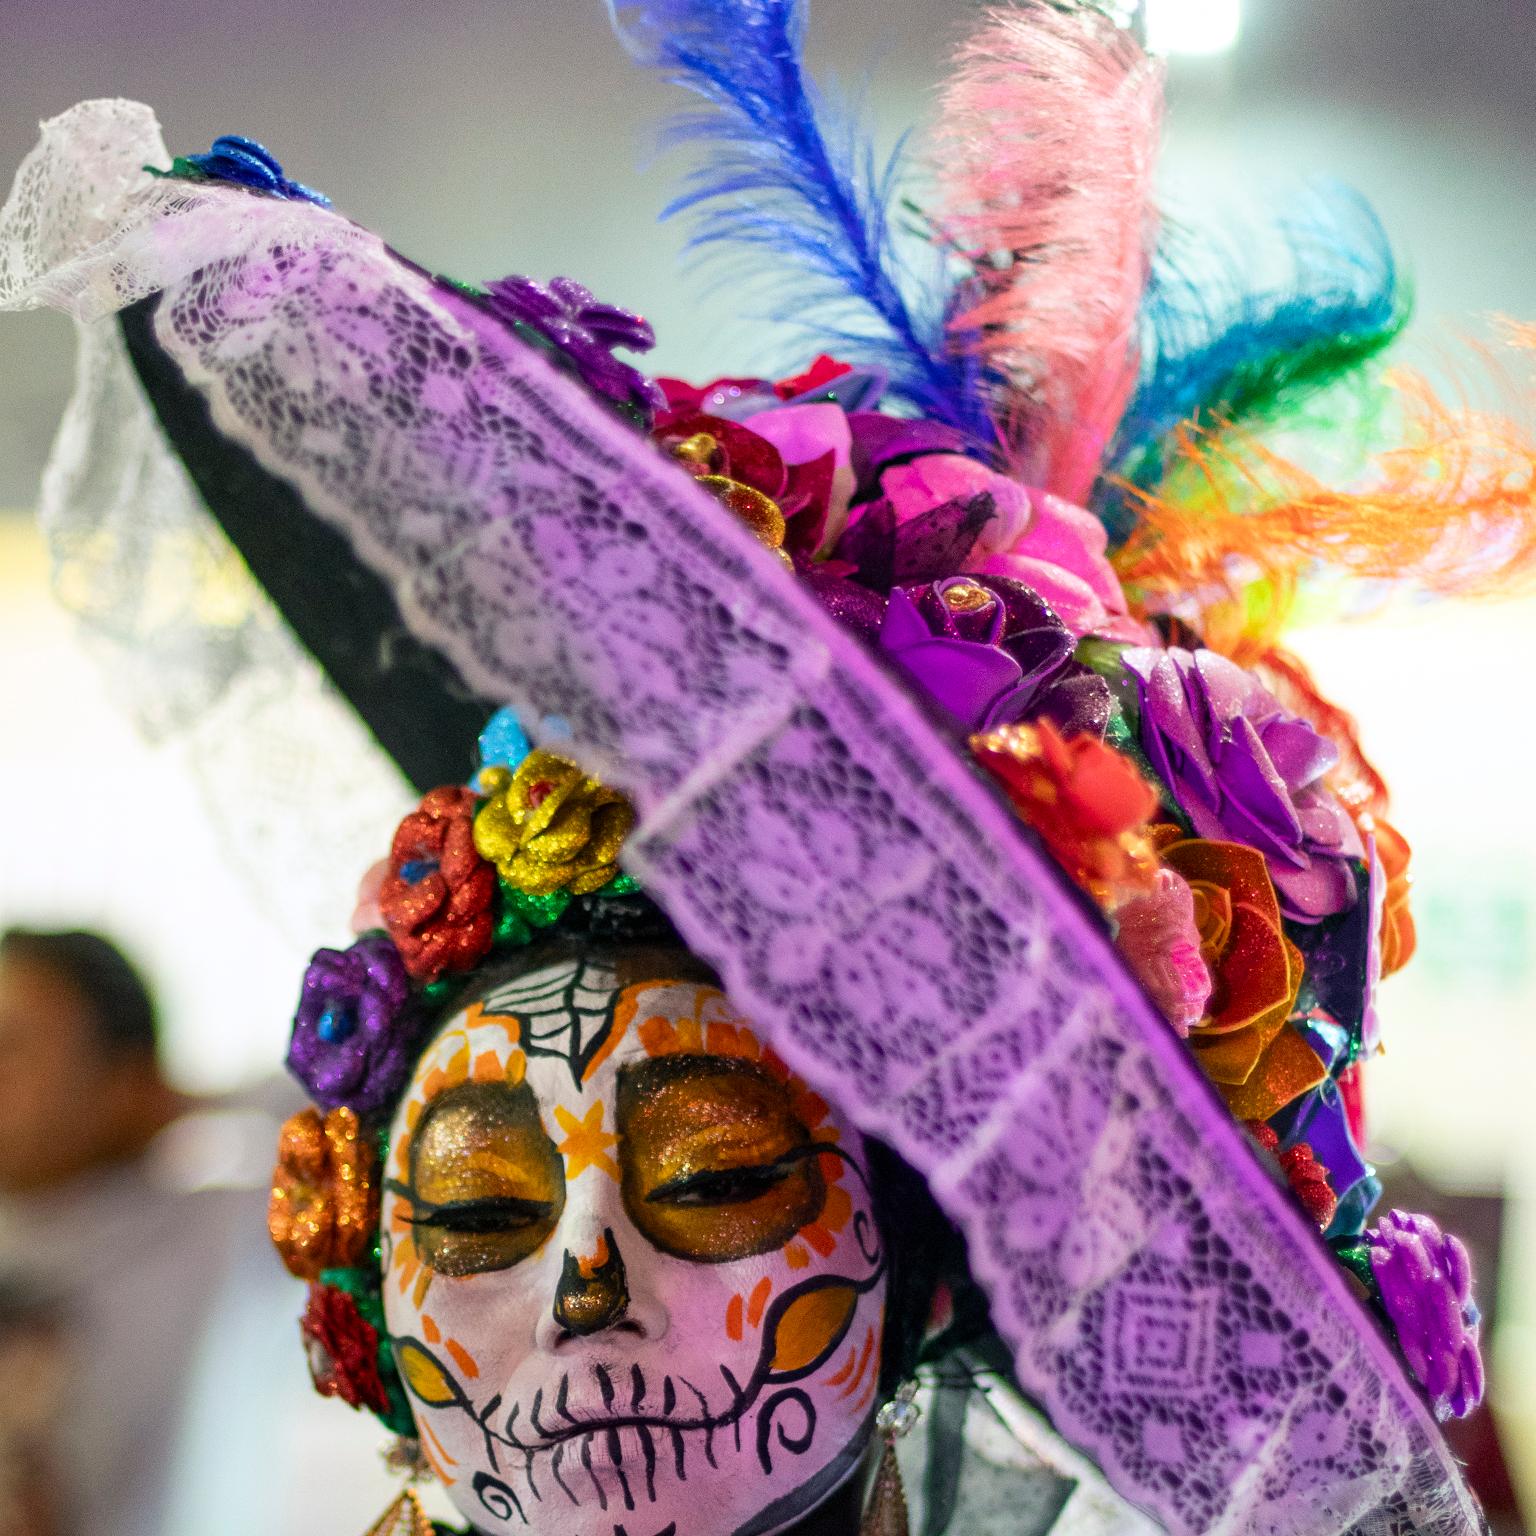 “Death with attitude”, Day of the Dead, Dia de los Muertos, Isla Mujeres, Mexico, 2023

Photograph by Cosmo Condina in colour of a woman dressed for the celebration of the Day of the Dead. Isla Mujeres, Mexico, 2023 

Archival Pigment Print, 19” X